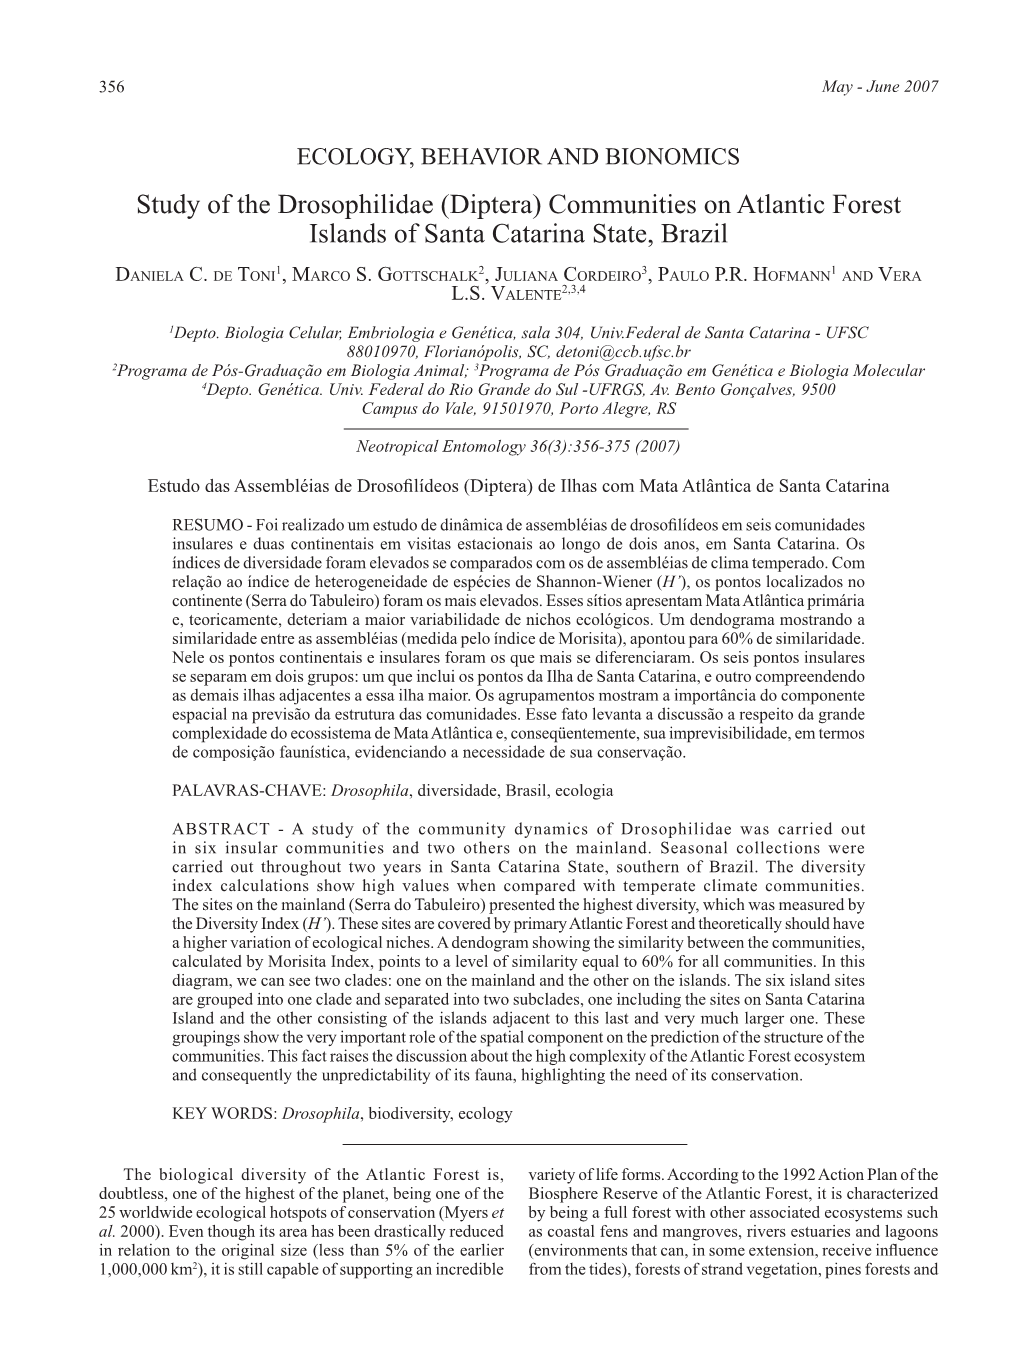 Study of the Drosophilidae (Diptera) Communities on Atlantic Forest Islands of Santa Catarina State, Brazil